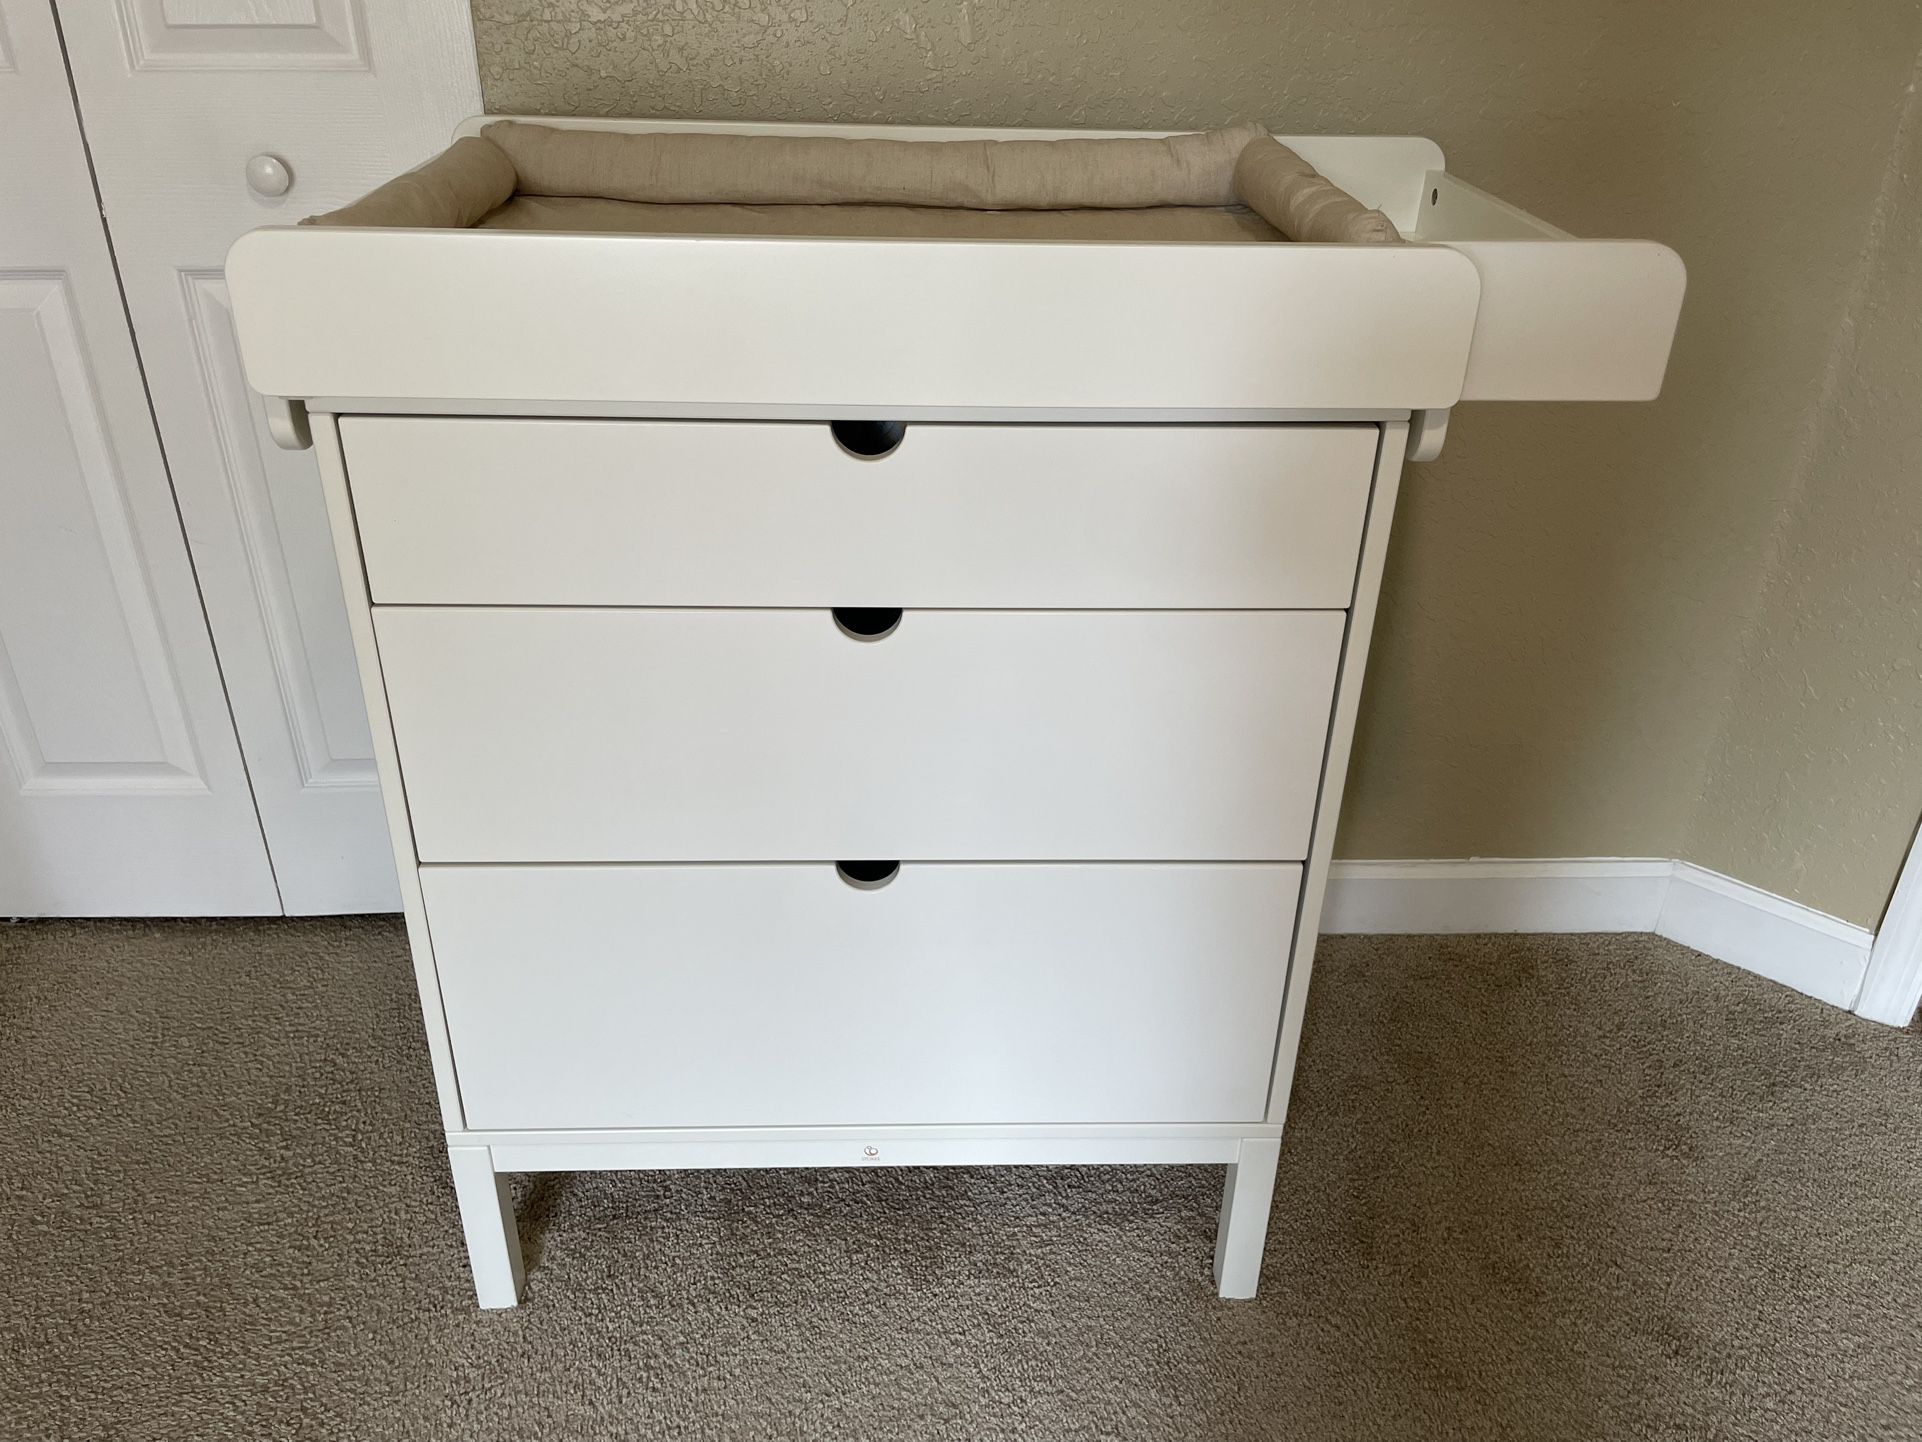 Stokke Chest of drawers and changing table with pillow.